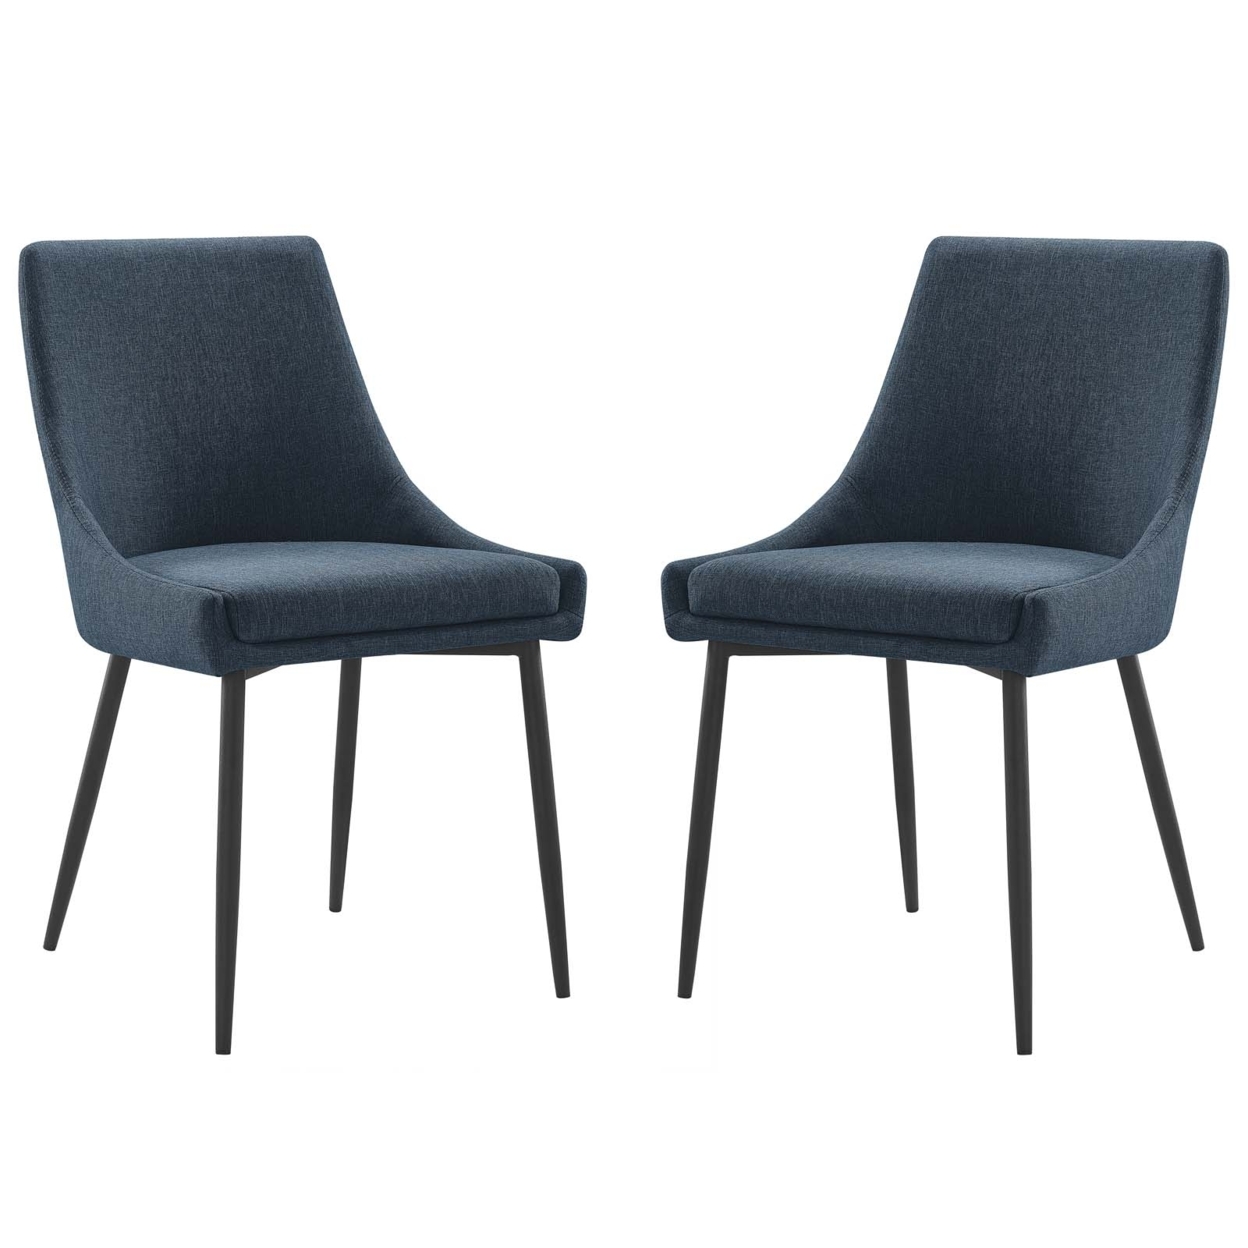 Viscount Upholstered Fabric Dining Chairs - Set Of 2, Black Azure